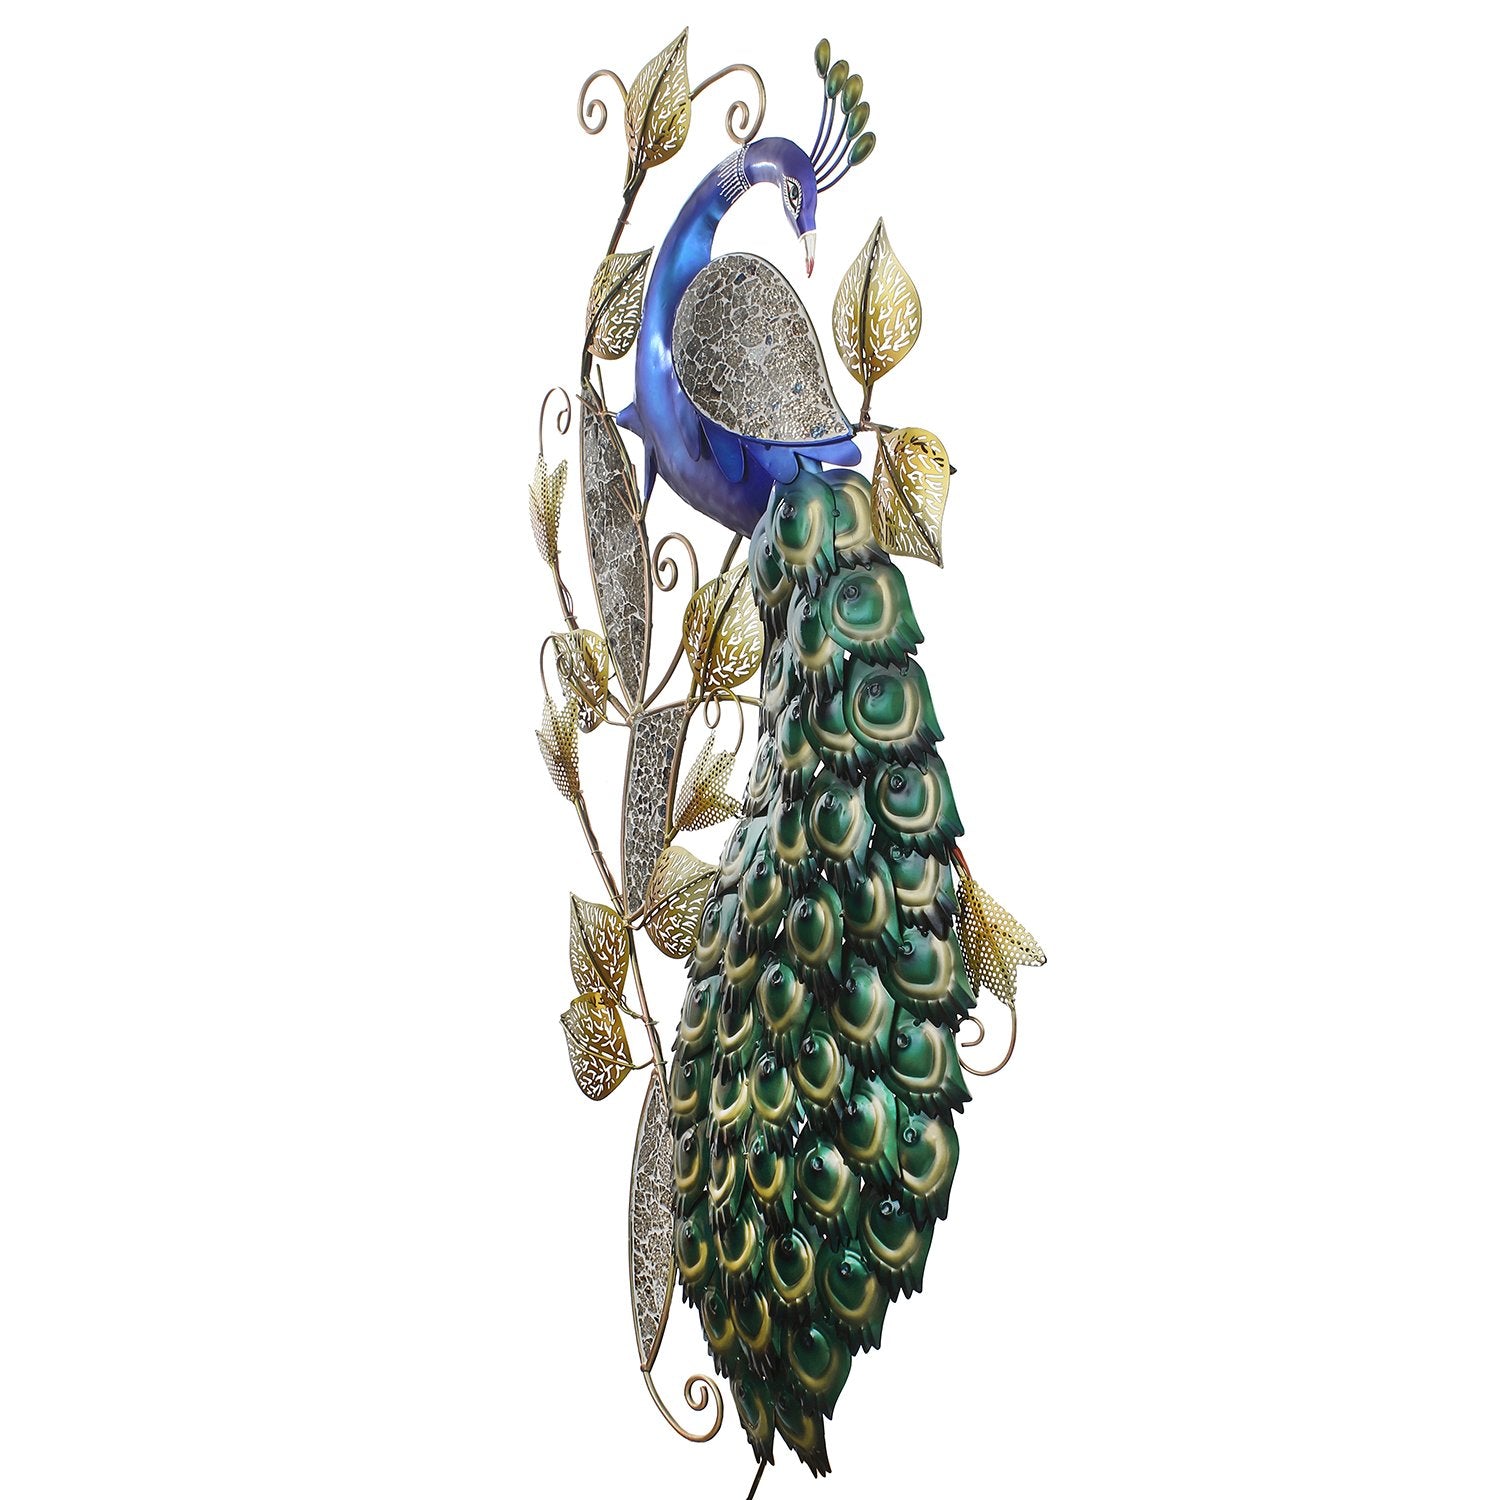 Decorative Colorful Peacock Handcrafted Iron Wall Hanging with background LED's (Blue, Green and Golden) 5